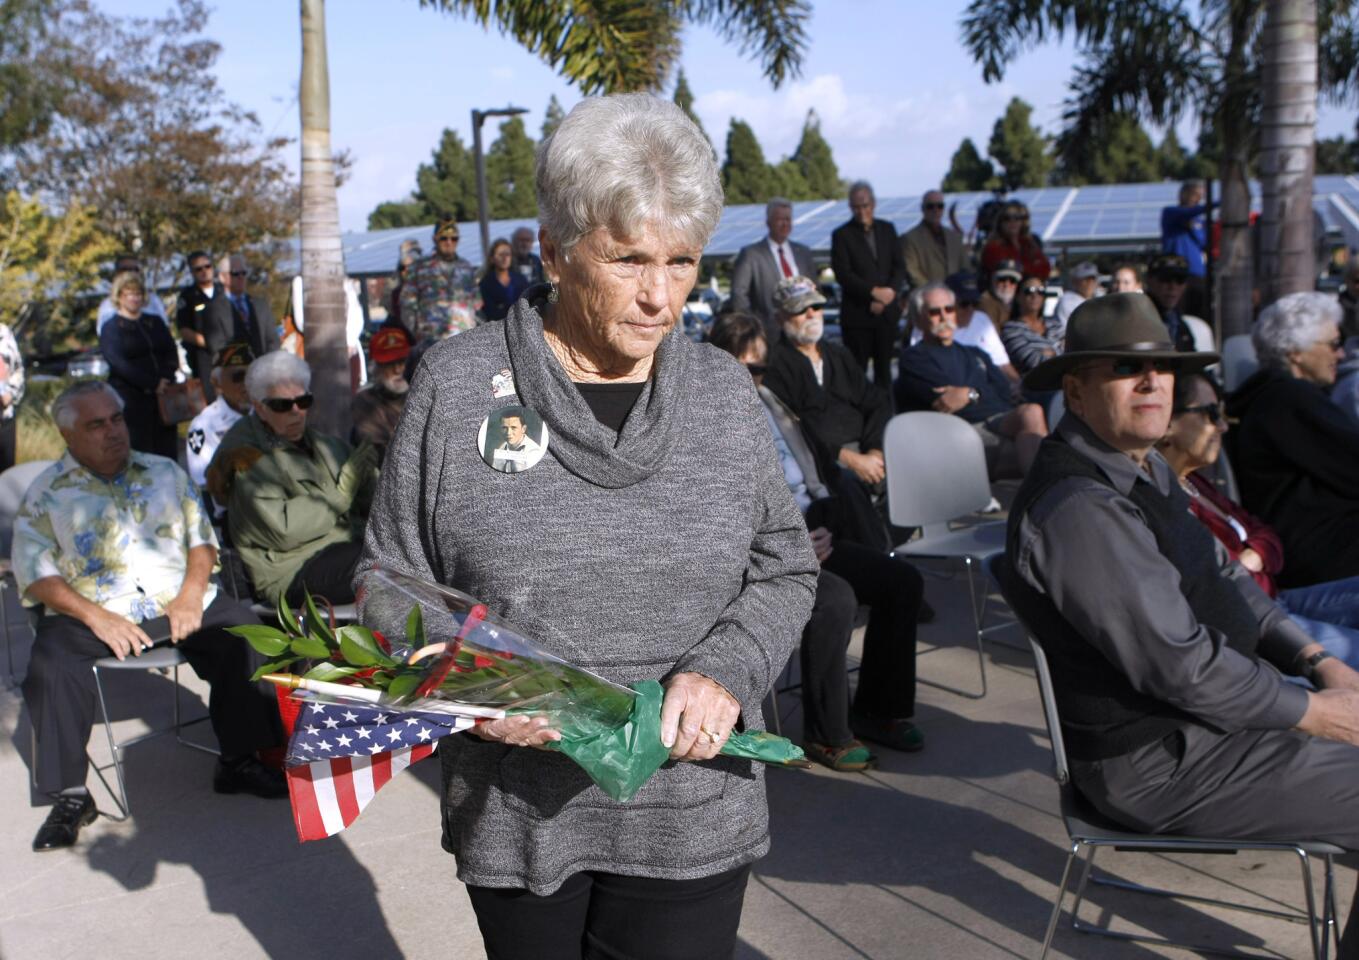 Karen Richardson brought flowers for her father, Ardenne Allen Woodward, who died on Dec. 7, 1941, and placed them at the 75th Anniversary of Pearl Harbor Attack Remembrance Ceremony at the Huntington Beach City Hall Veterans Memorial on Wednesday. Woodward was on the USS Arizona the day the Japanese bombed Pearl Harbor, 75 years ago.